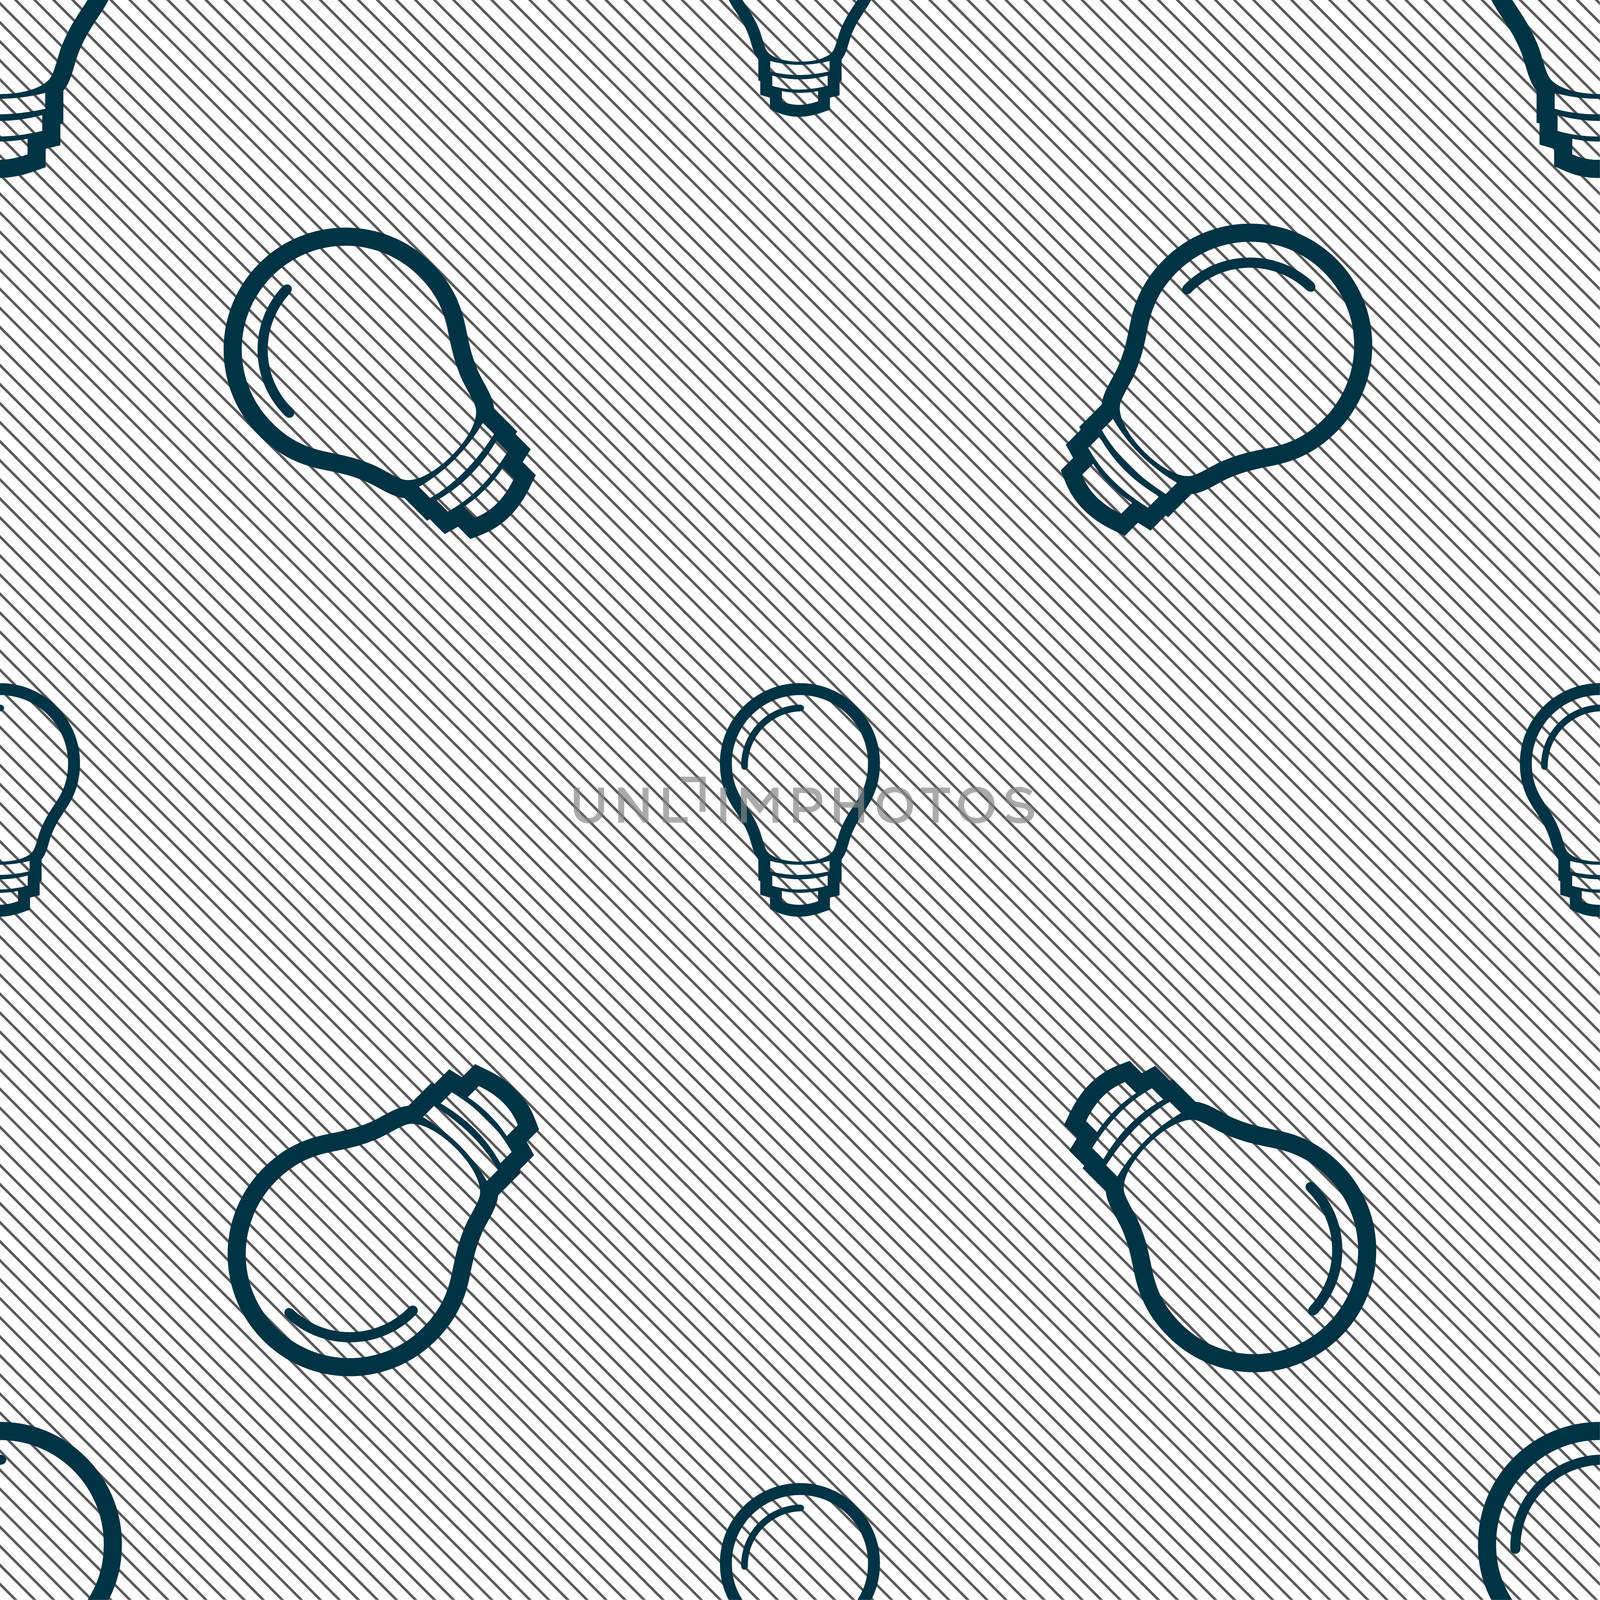 Light bulb icon sign. Seamless pattern with geometric texture. illustration